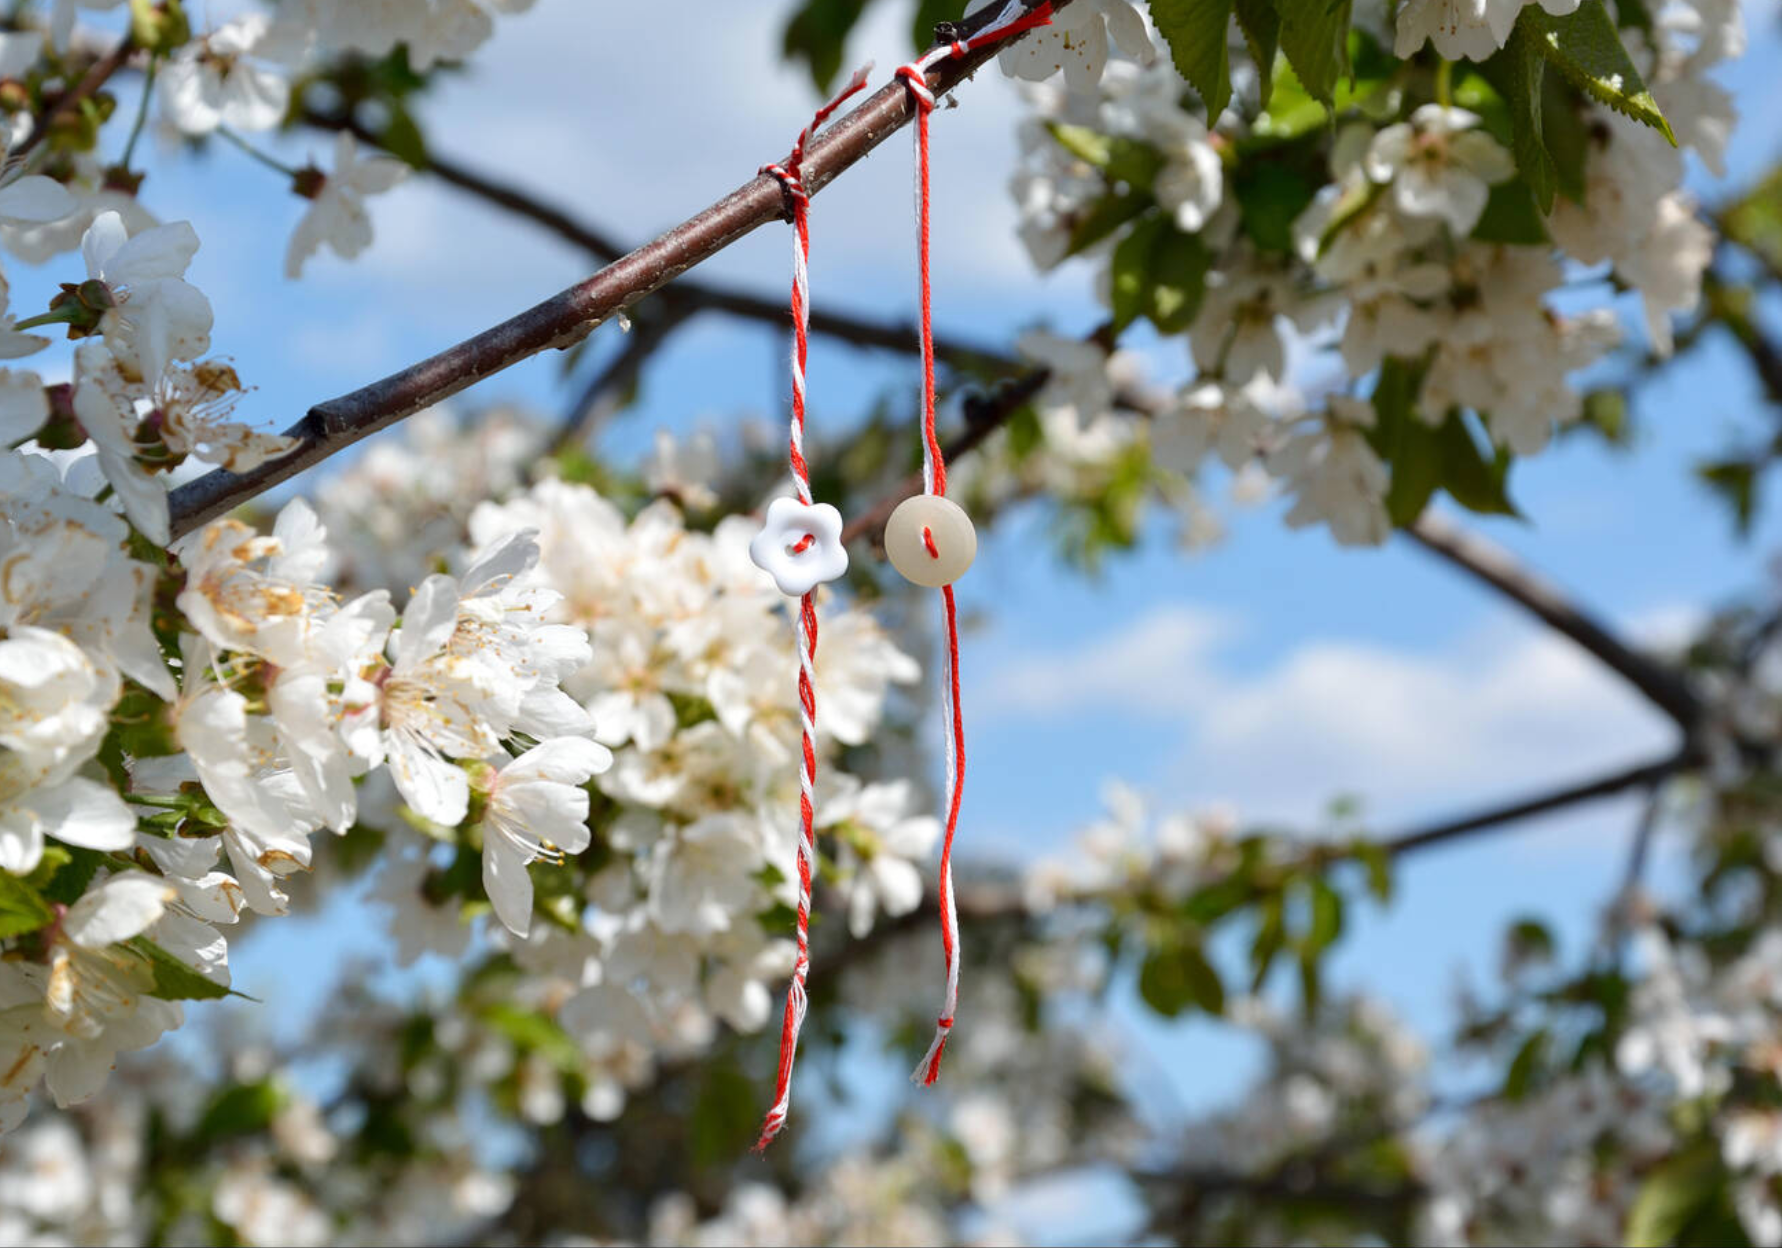 Red-and-white threads are also hung on trees to celebrate spring in other European countries, such as Bulgaria and Romania.